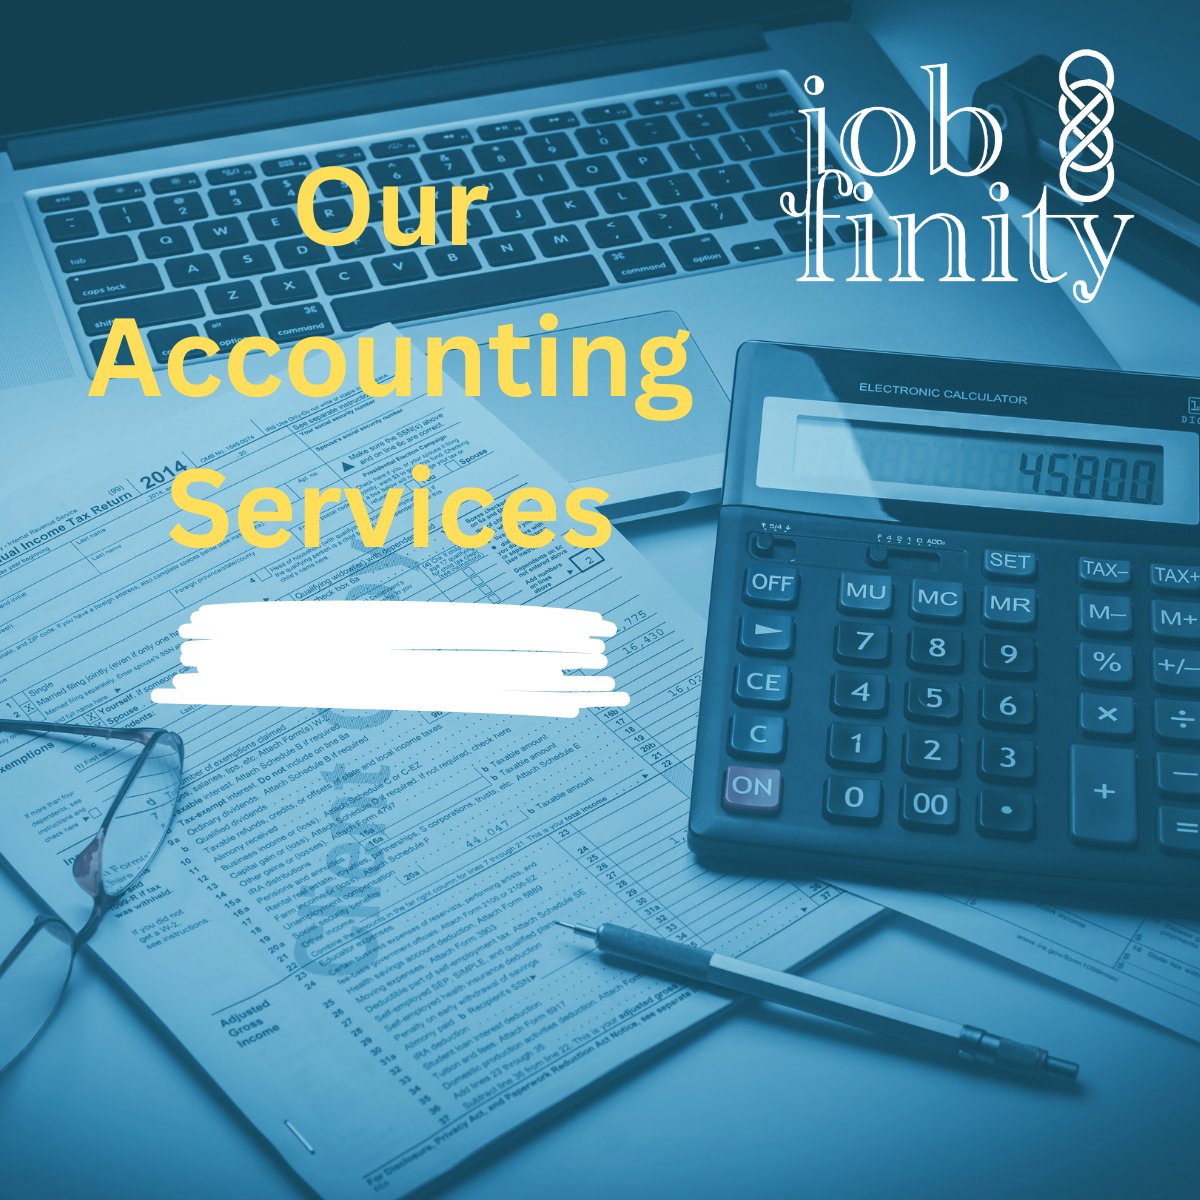 🔍 Looking to grow your business without the hassle of financial management? Jobfinity has you covered! Our expert accounting services include meticulous bookkeeping and precise payroll. Trust us with your accounting needs and stay focused on expansion!

#Jobfinity #Accounting